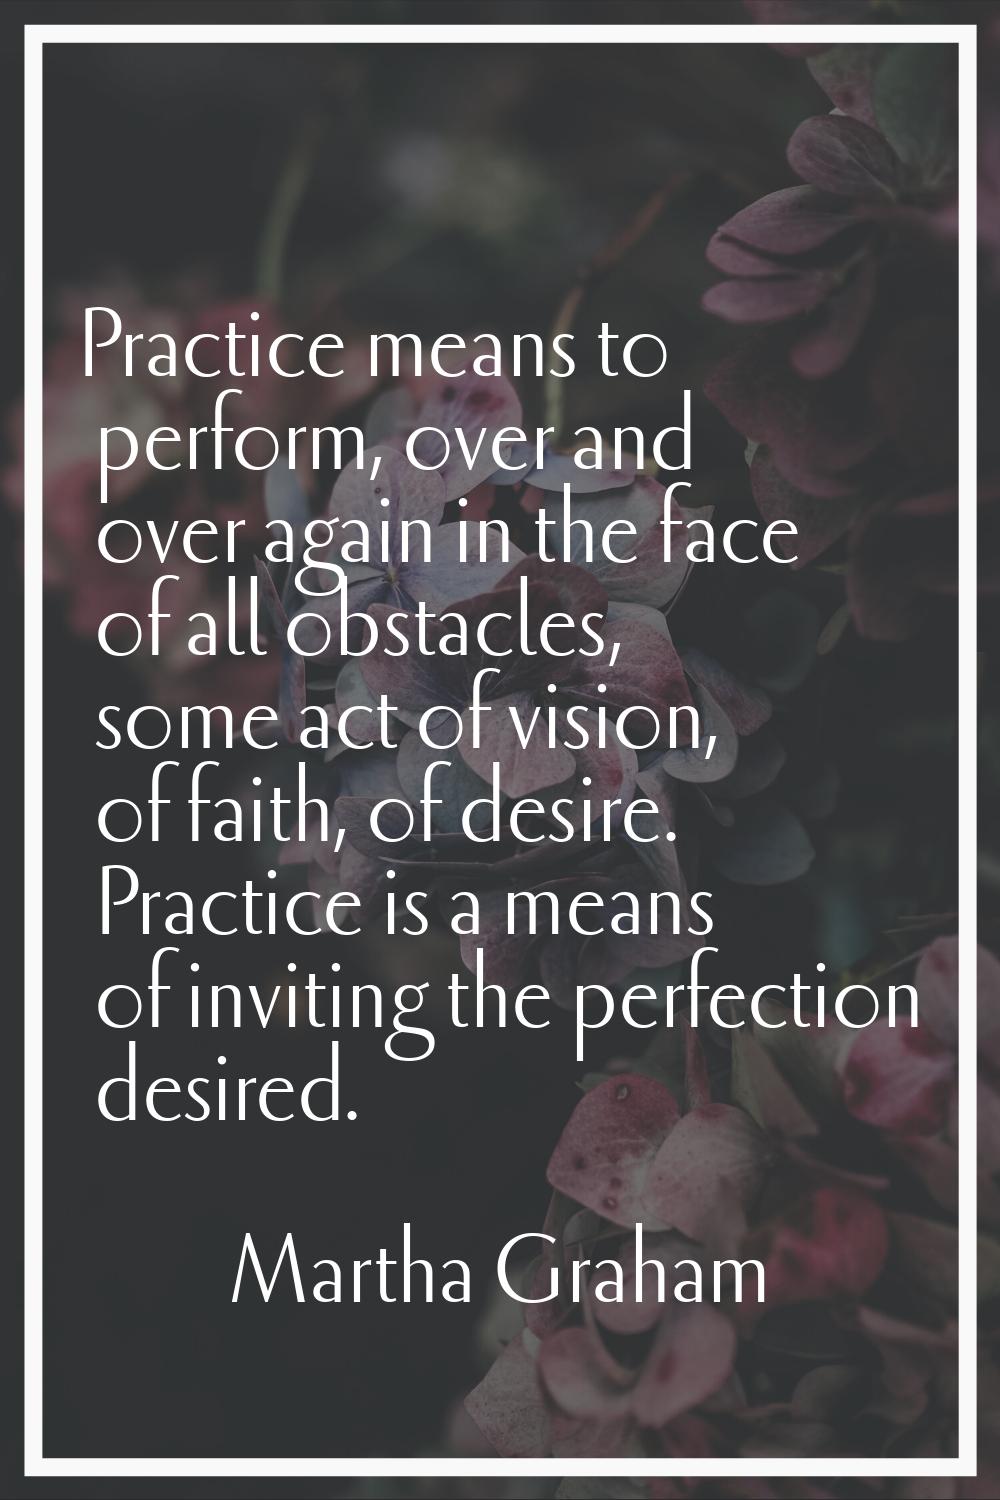 Practice means to perform, over and over again in the face of all obstacles, some act of vision, of